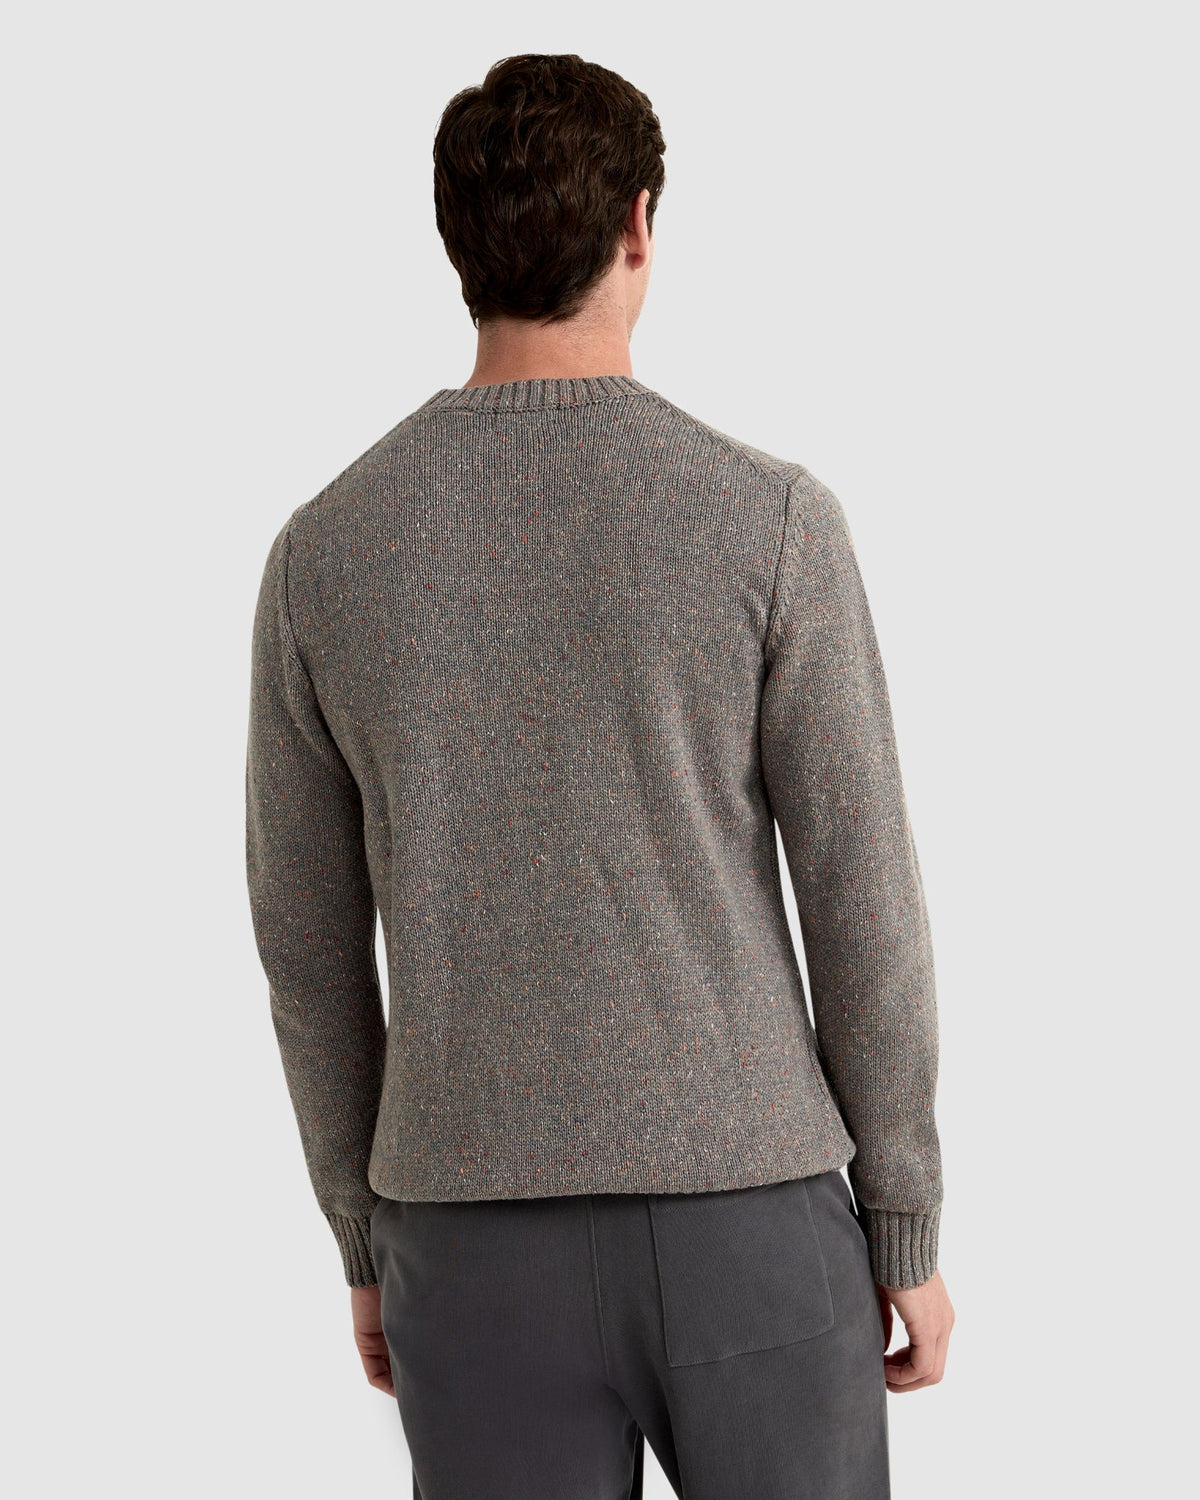 BENTLY DONEGAL CREW NECK KNIT TOP MENS KNITWEAR